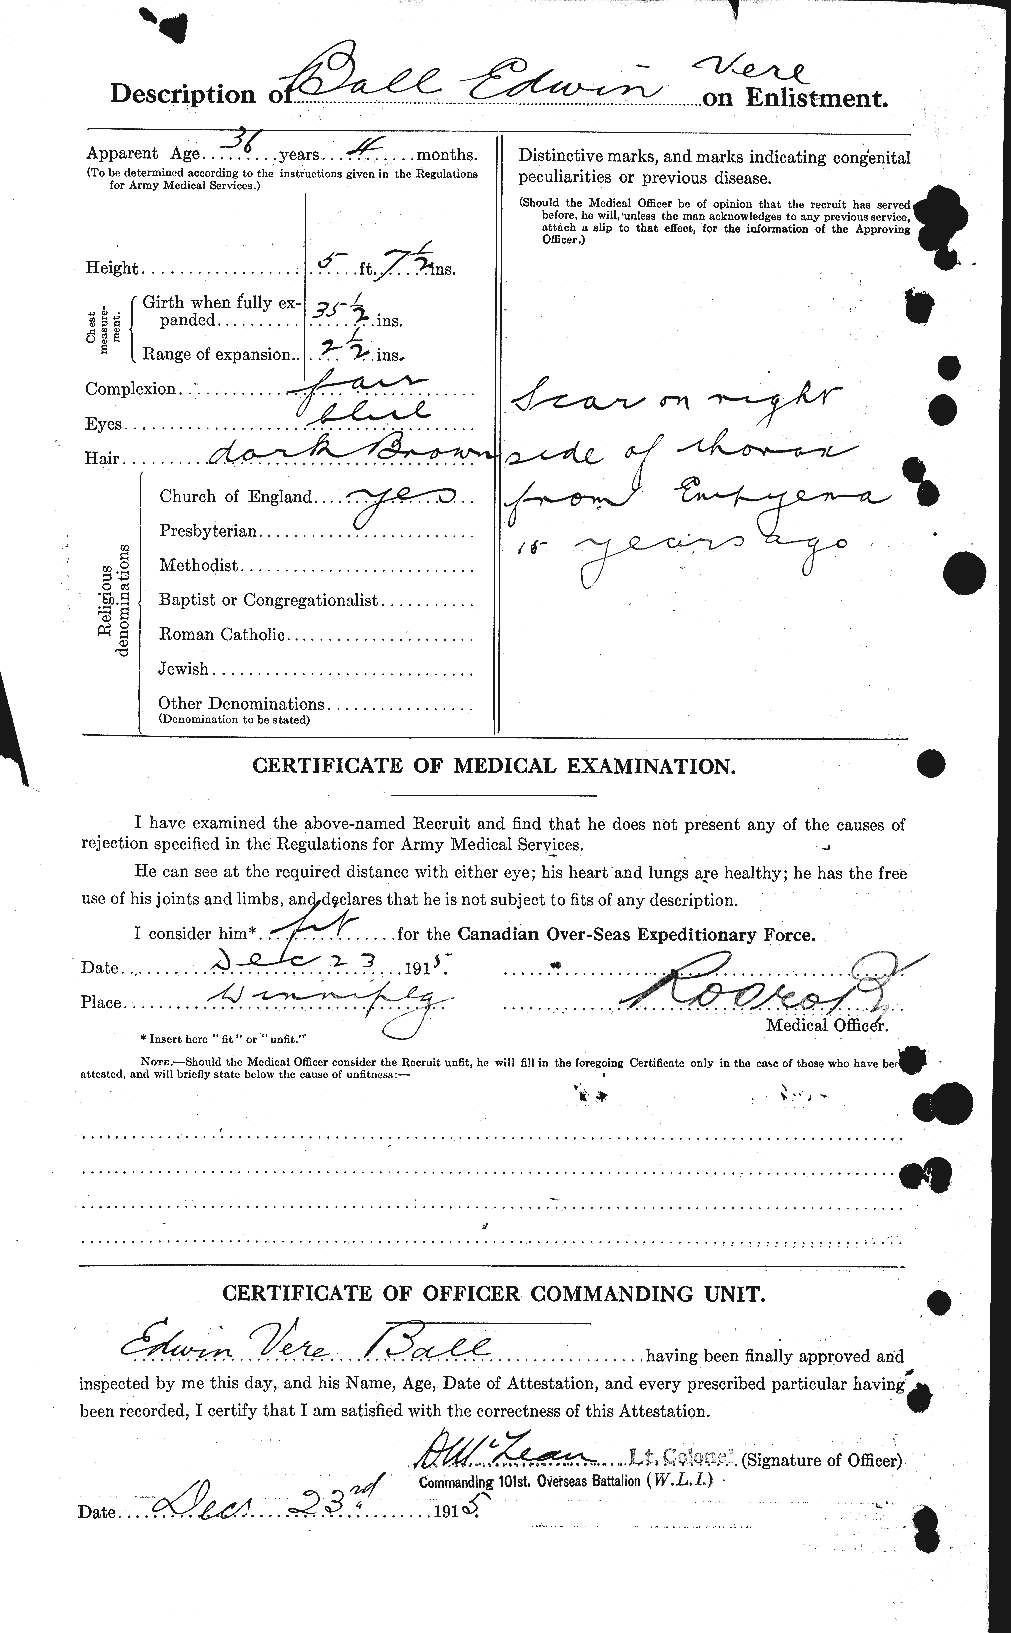 Personnel Records of the First World War - CEF 225823b